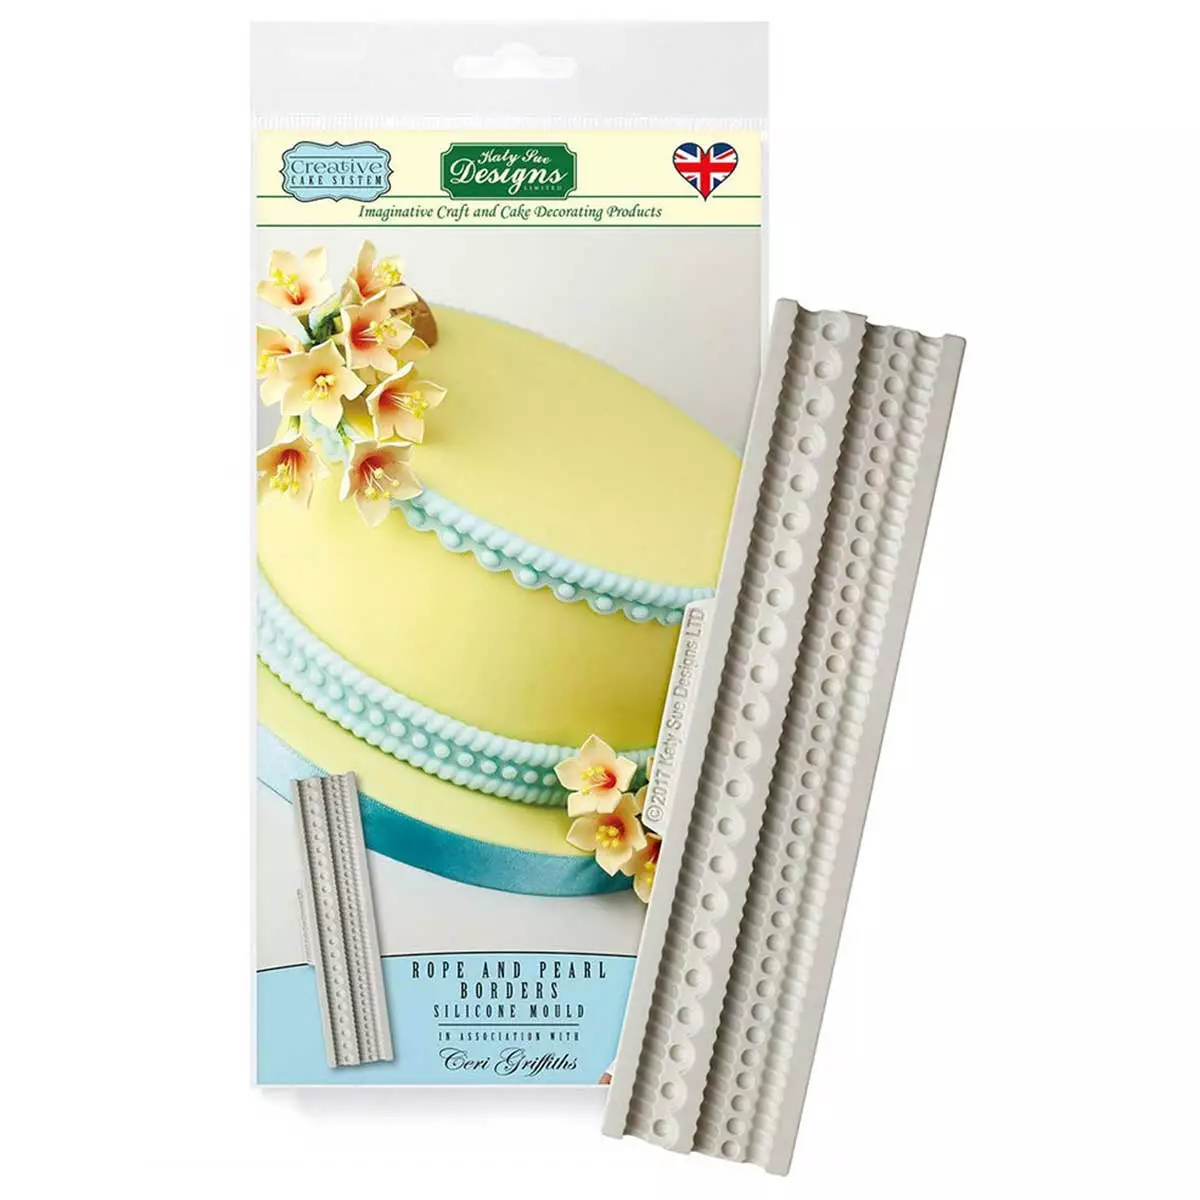 Cake Decorating Tools, Equipment, Cutters & Moulds